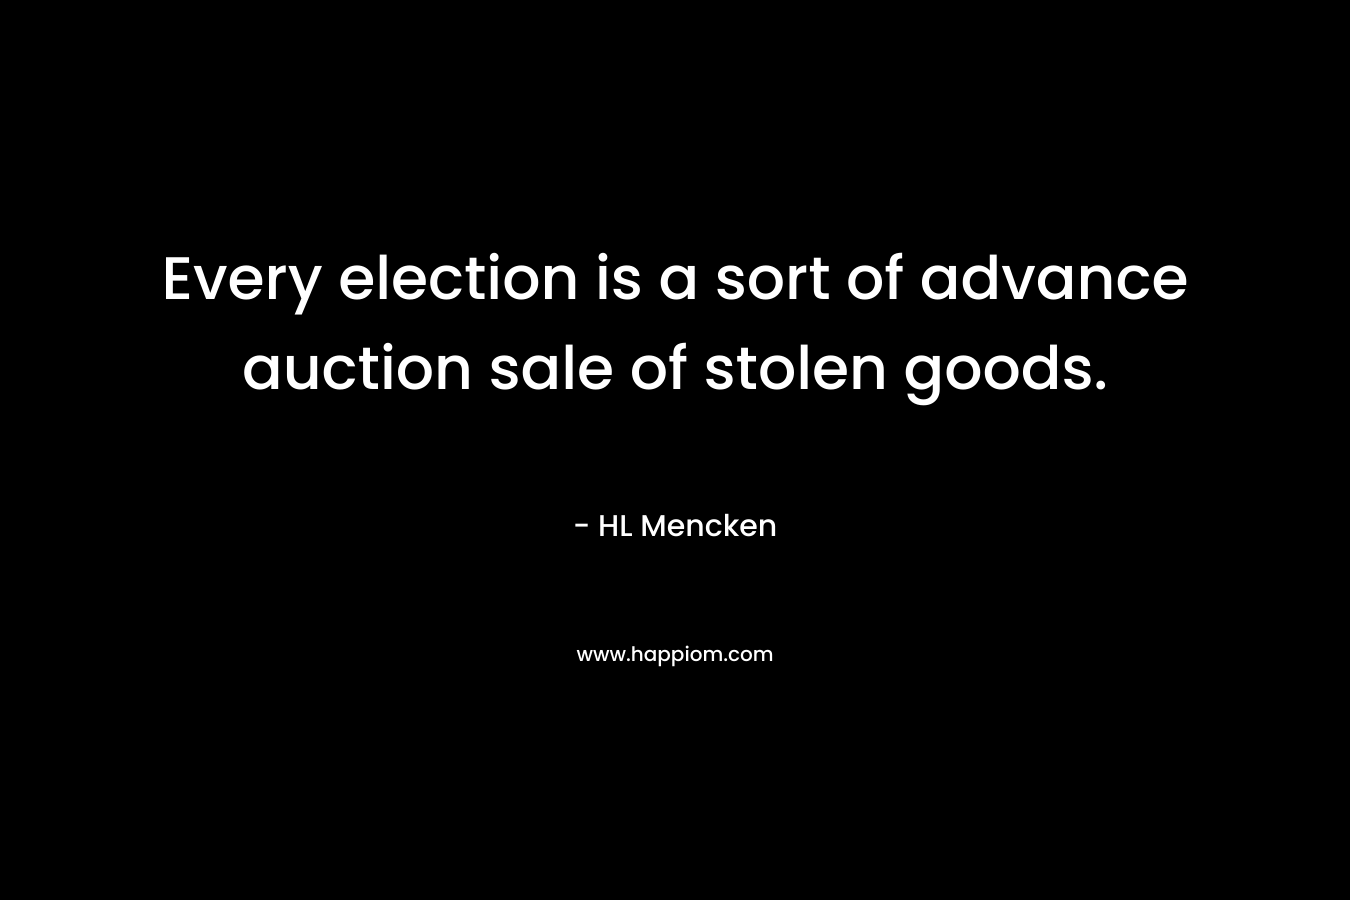 Every election is a sort of advance auction sale of stolen goods. – HL Mencken